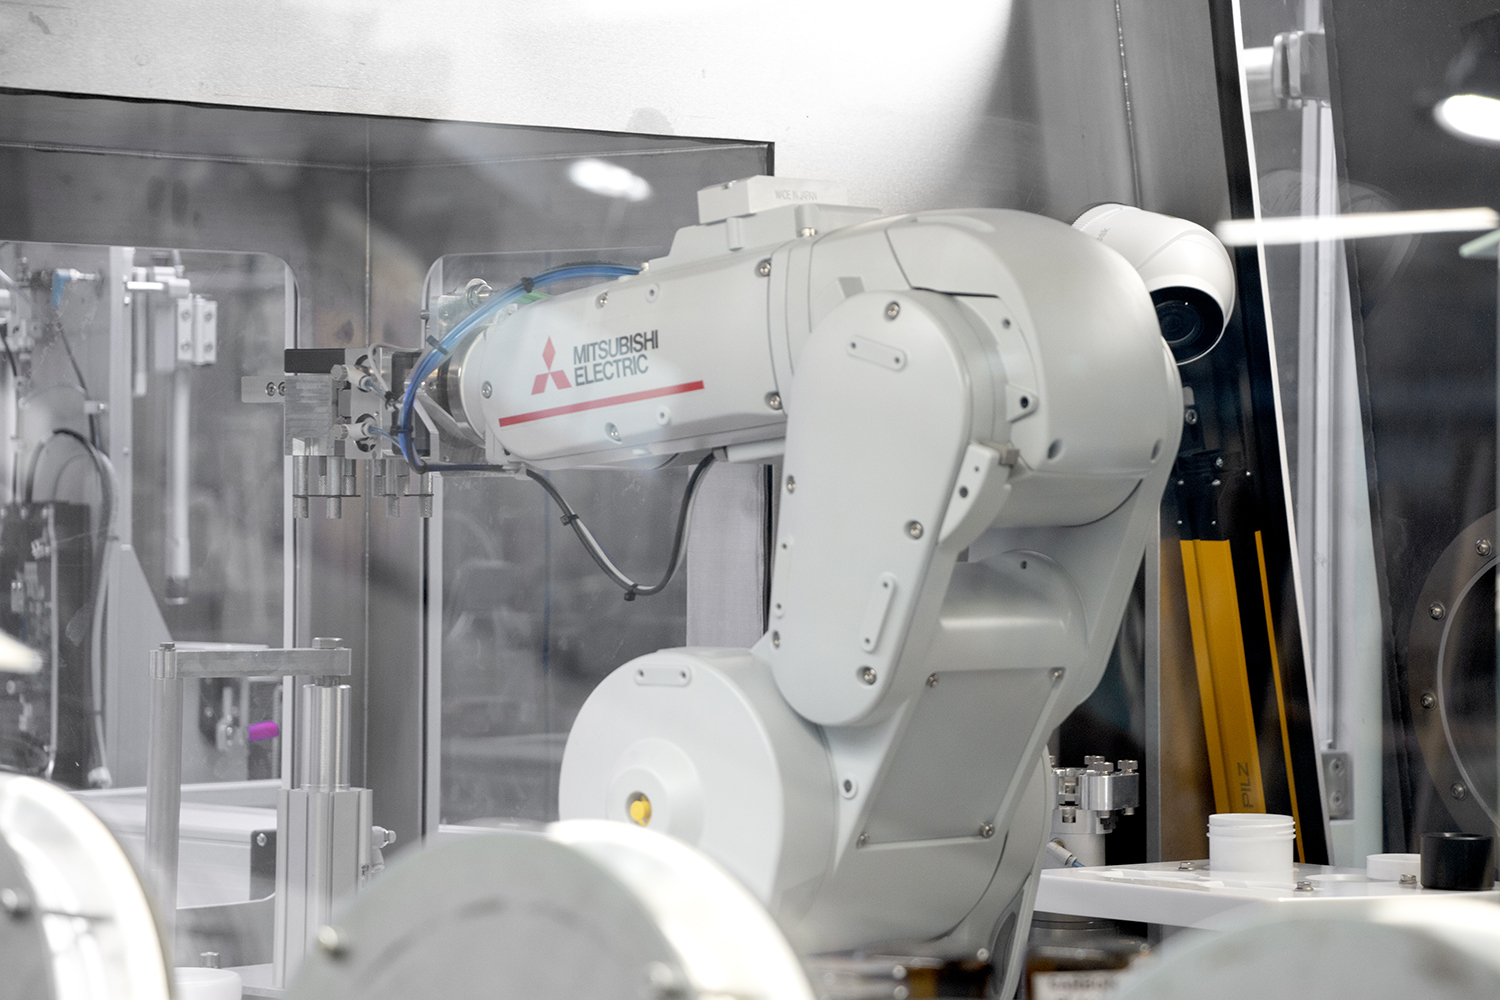 The MELFA RV-series robotic arms can increase productivity by 5-10 times by handling samples quickly and by supporting continuous operations, processing out of hours and during weekends. [Source: Labman Automation Ltd]